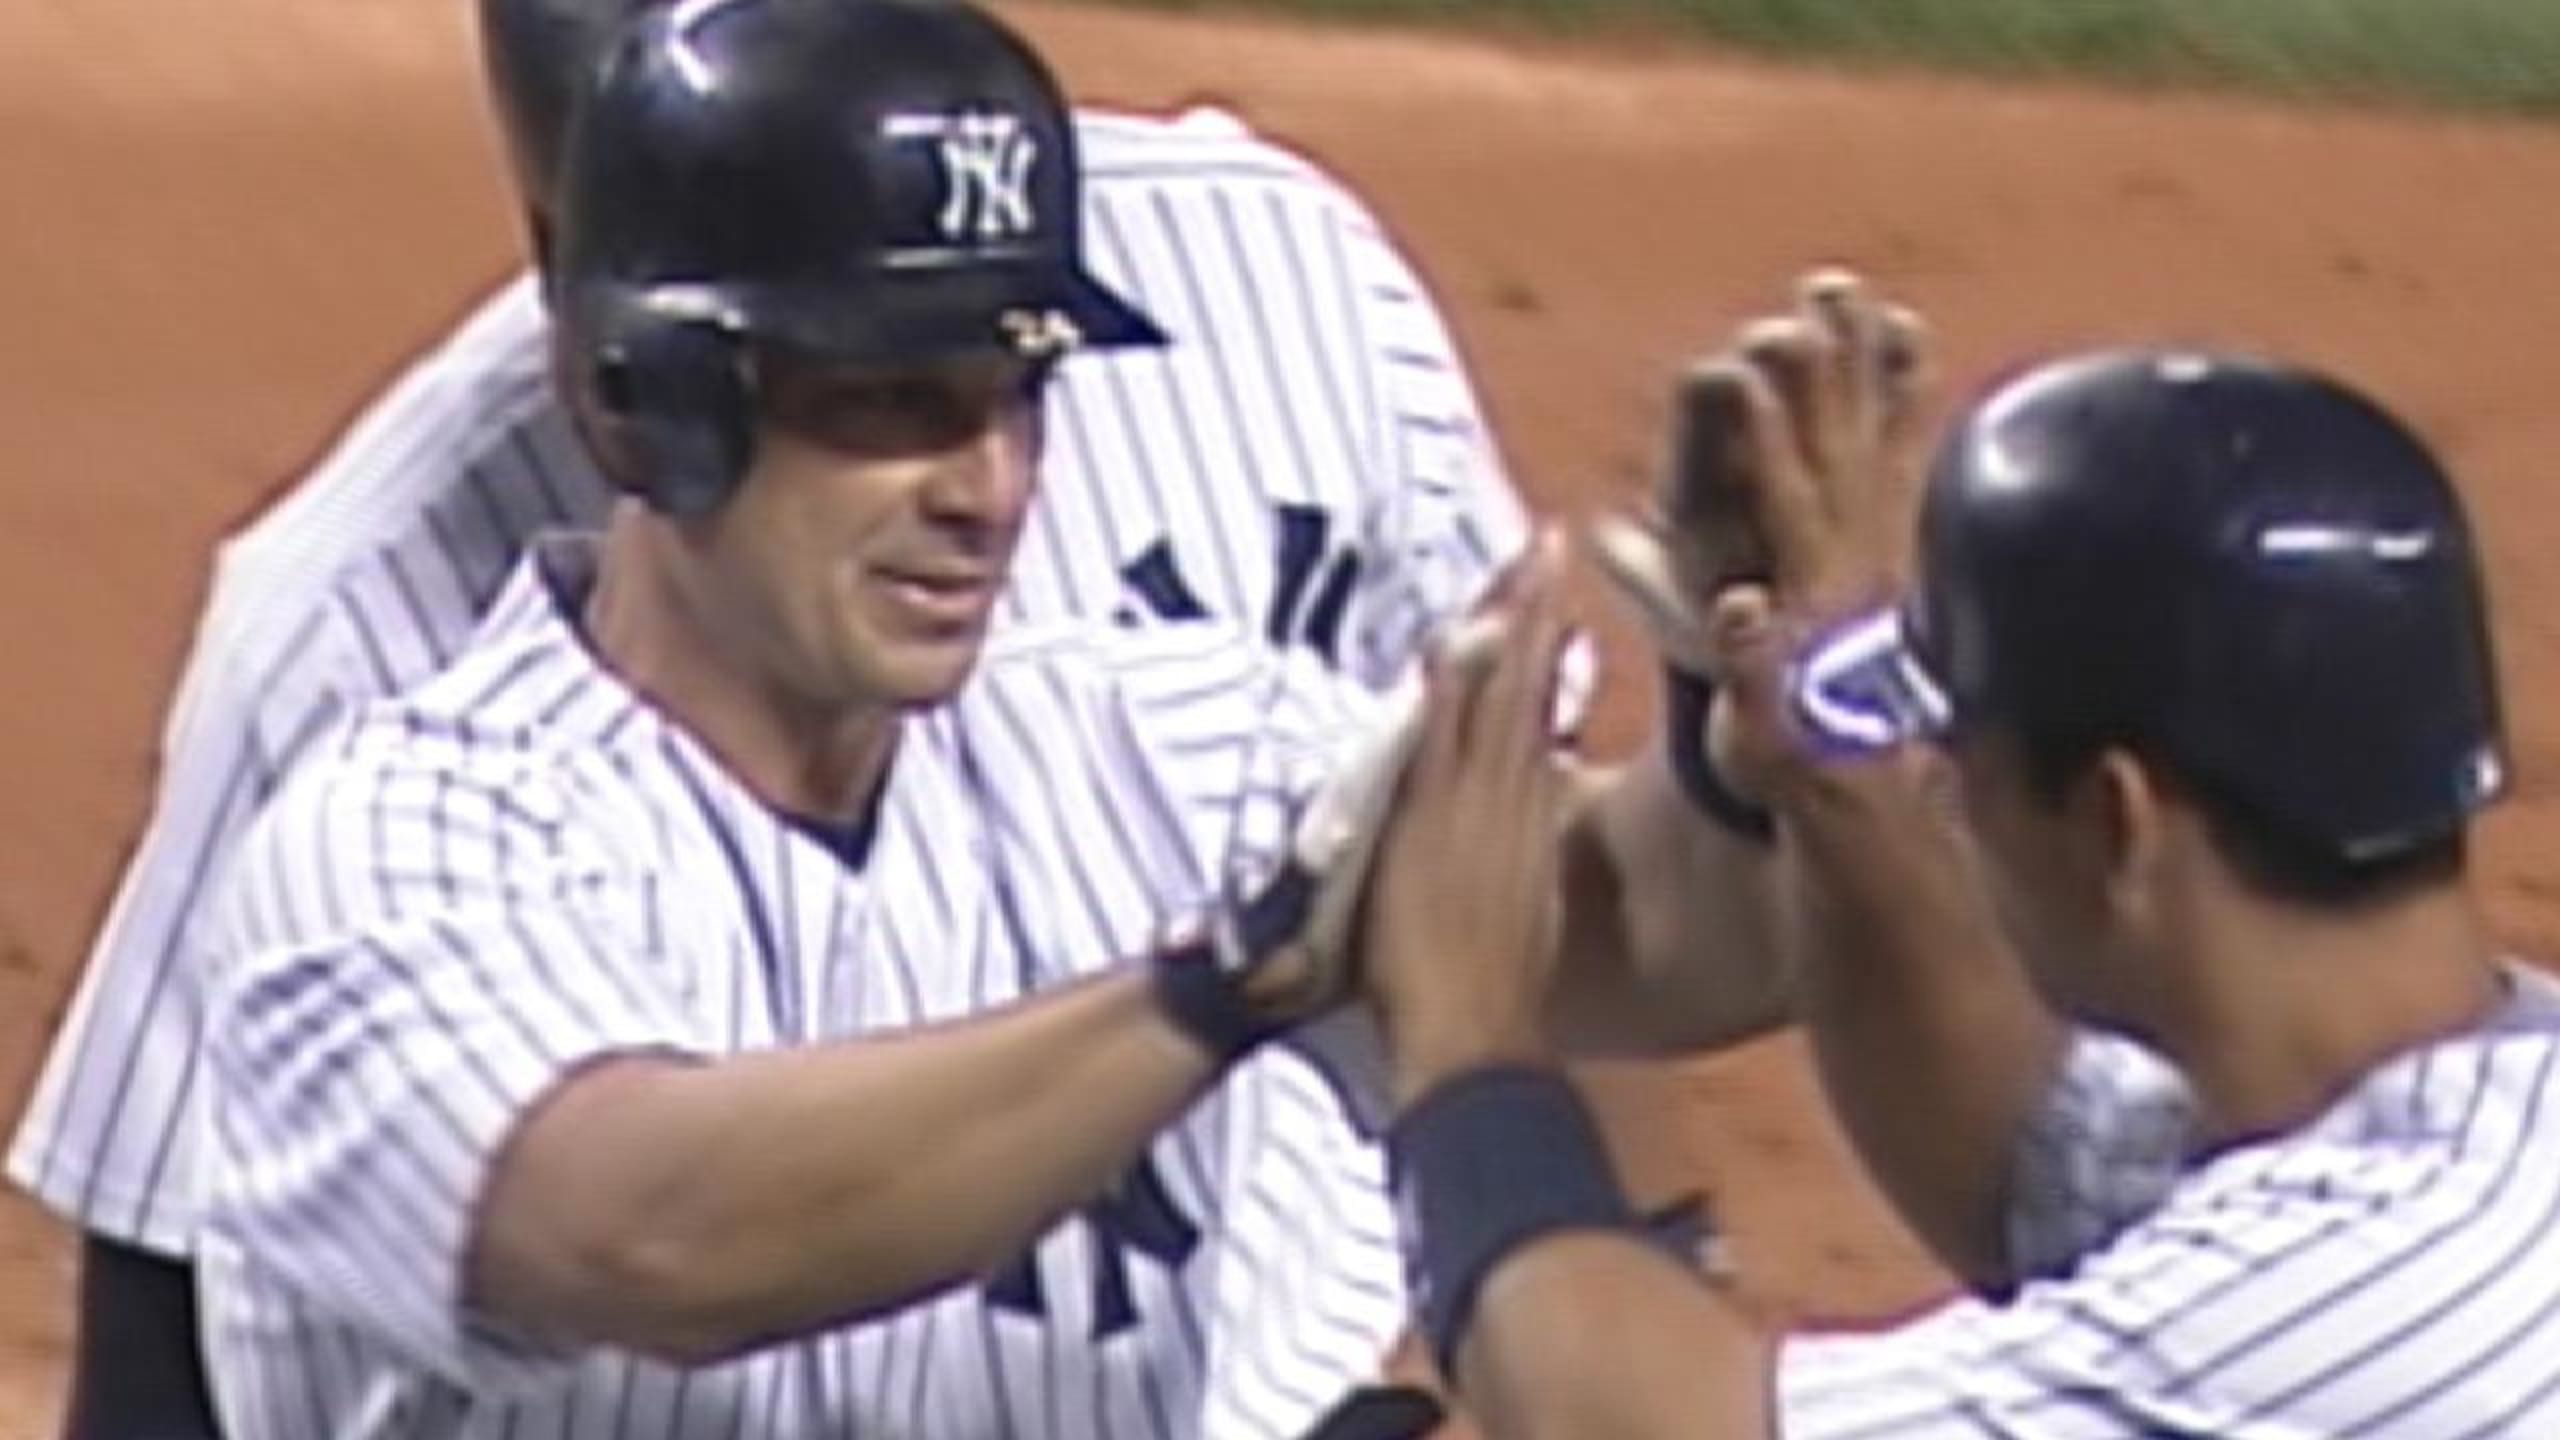 Top Five 1996-2001 Dynasty Yankees Moments - Pinstripe Alley